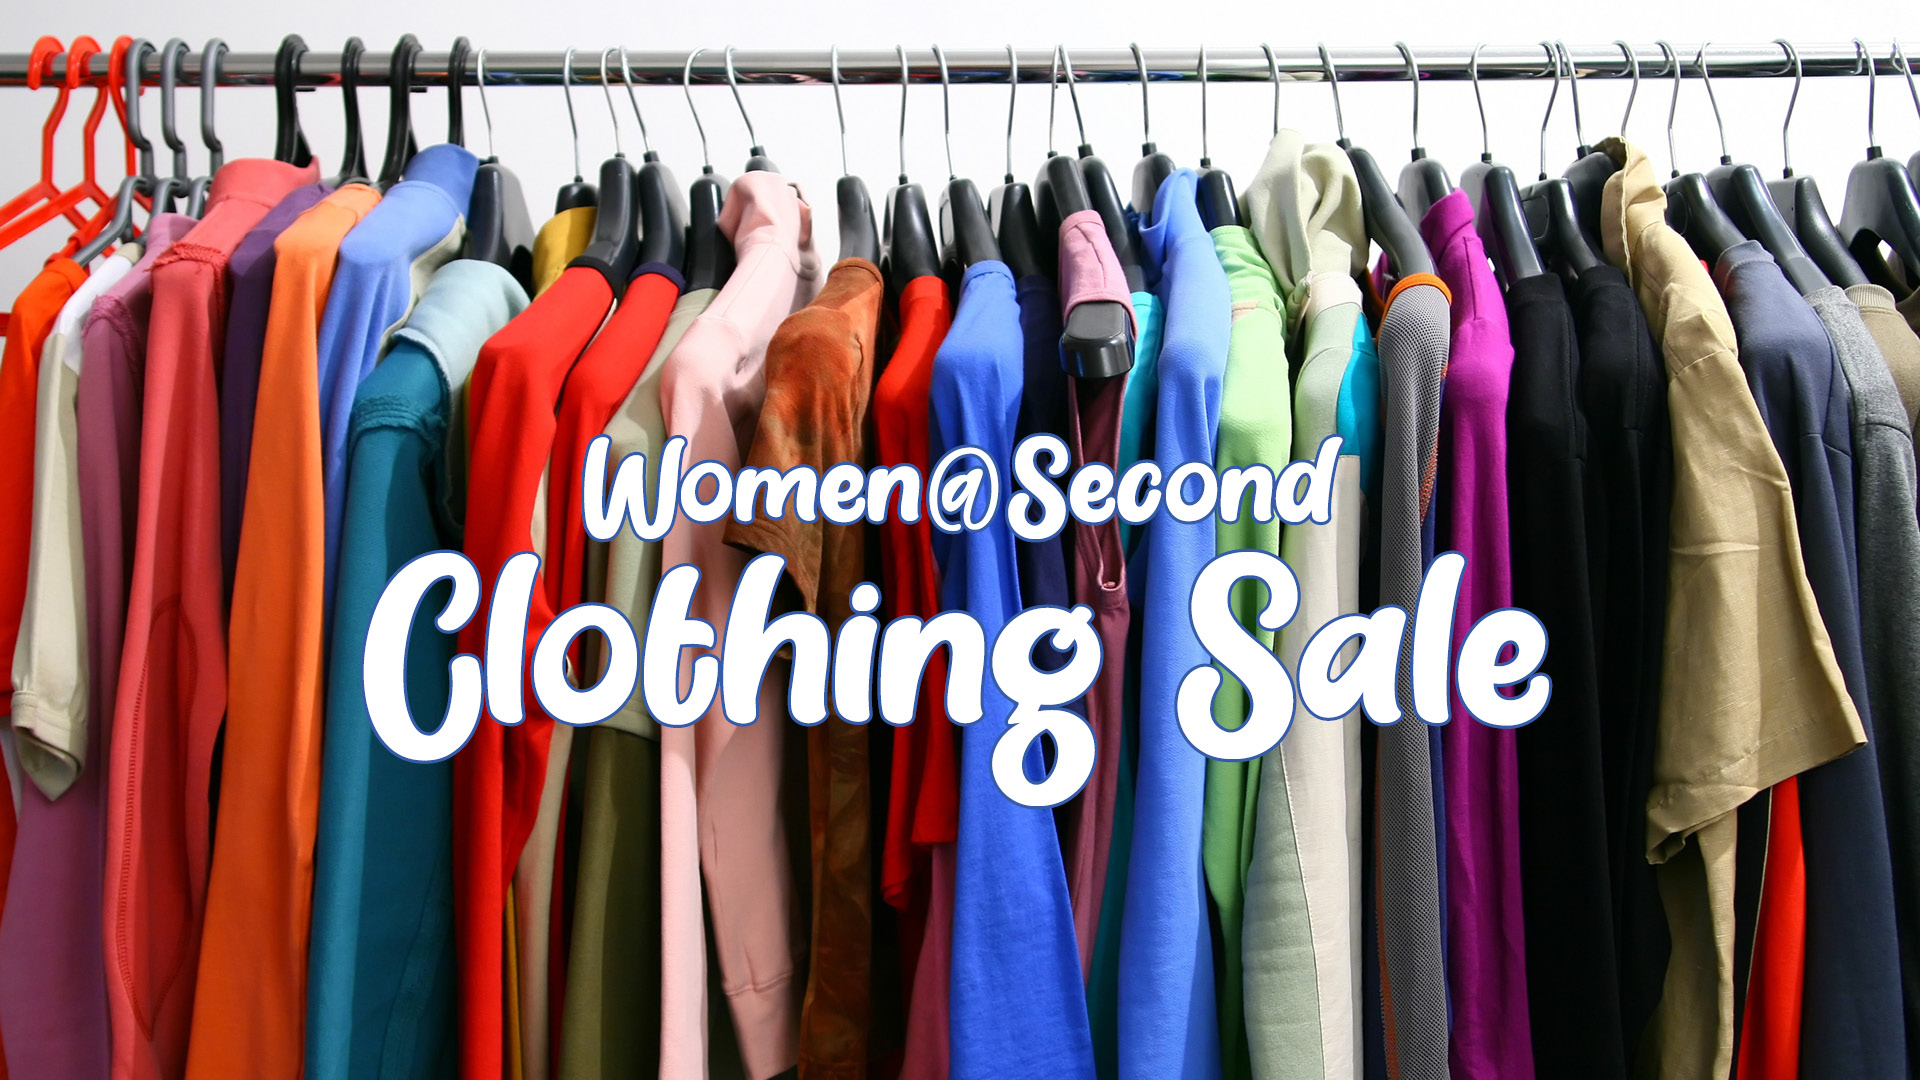 Women@Second Clothing Sale Saturday, October 15, 8 AM to Noon